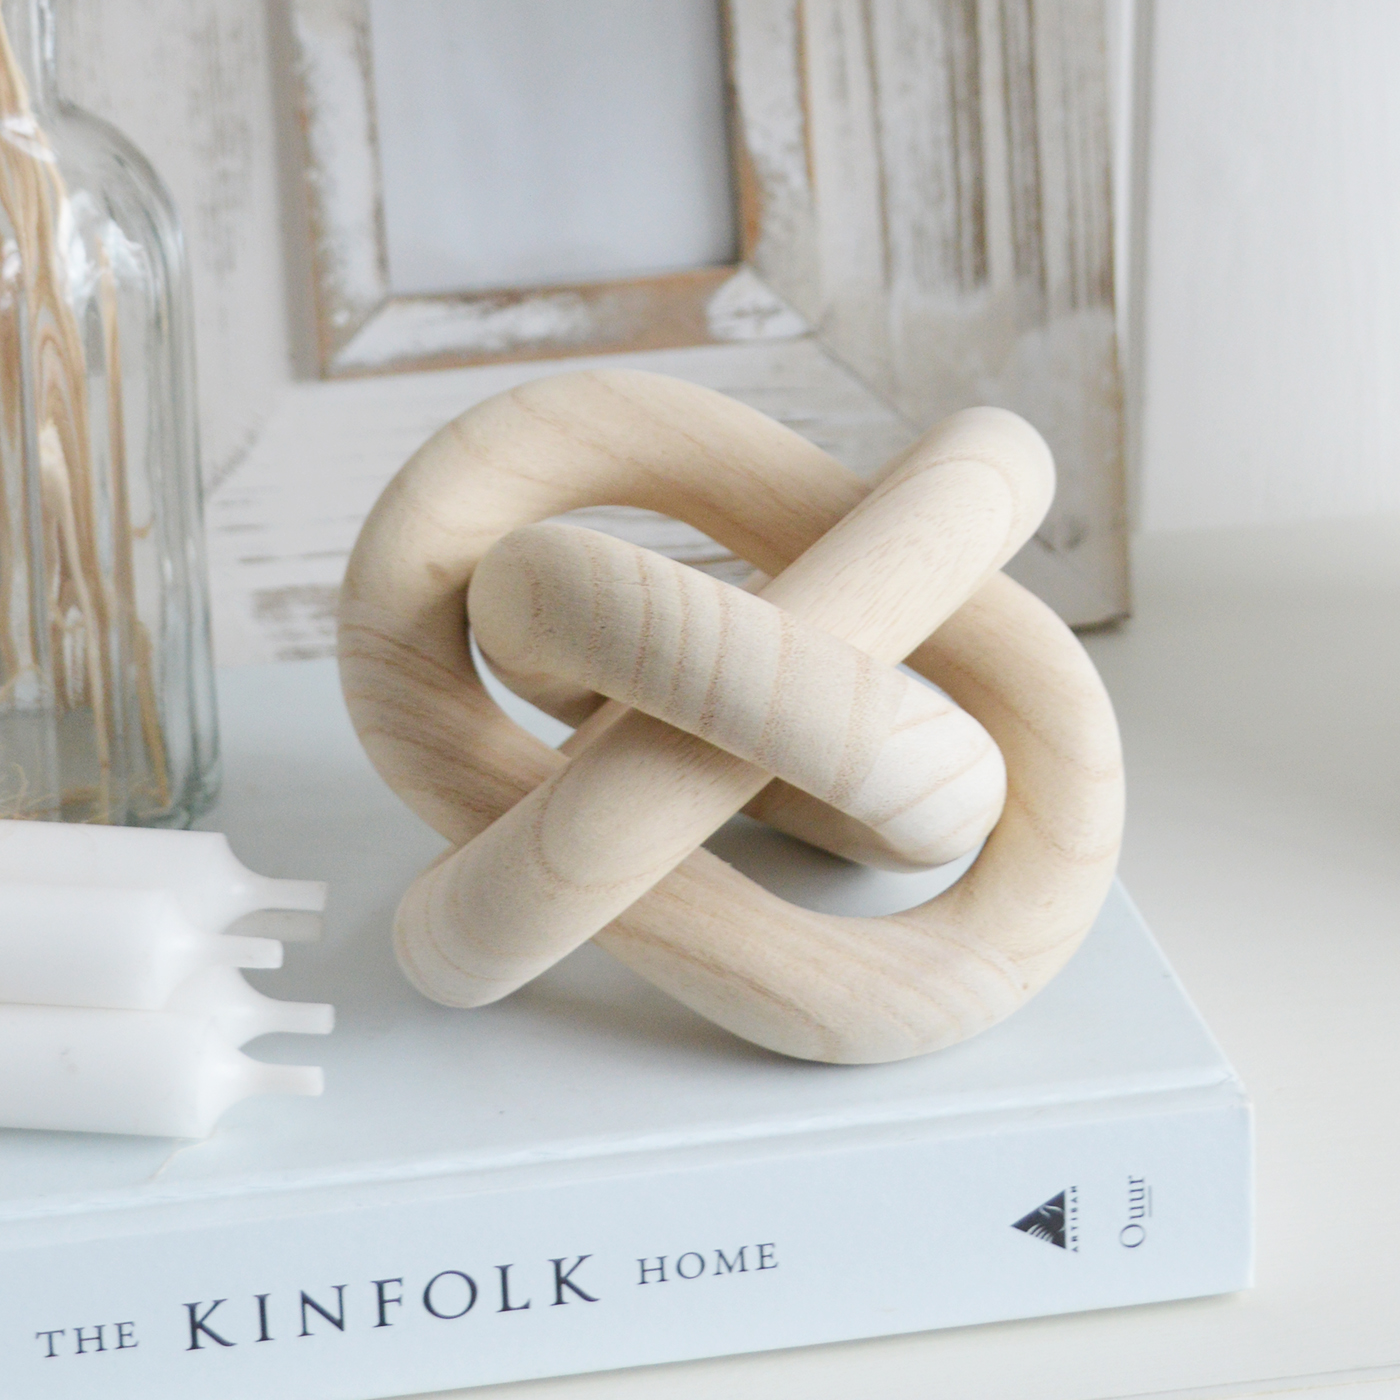 Wooden Knot Sculpture - Shelf, Coffee Table and Console Styling in Modern Farmhouse, Country and Coastal homes and Interiors